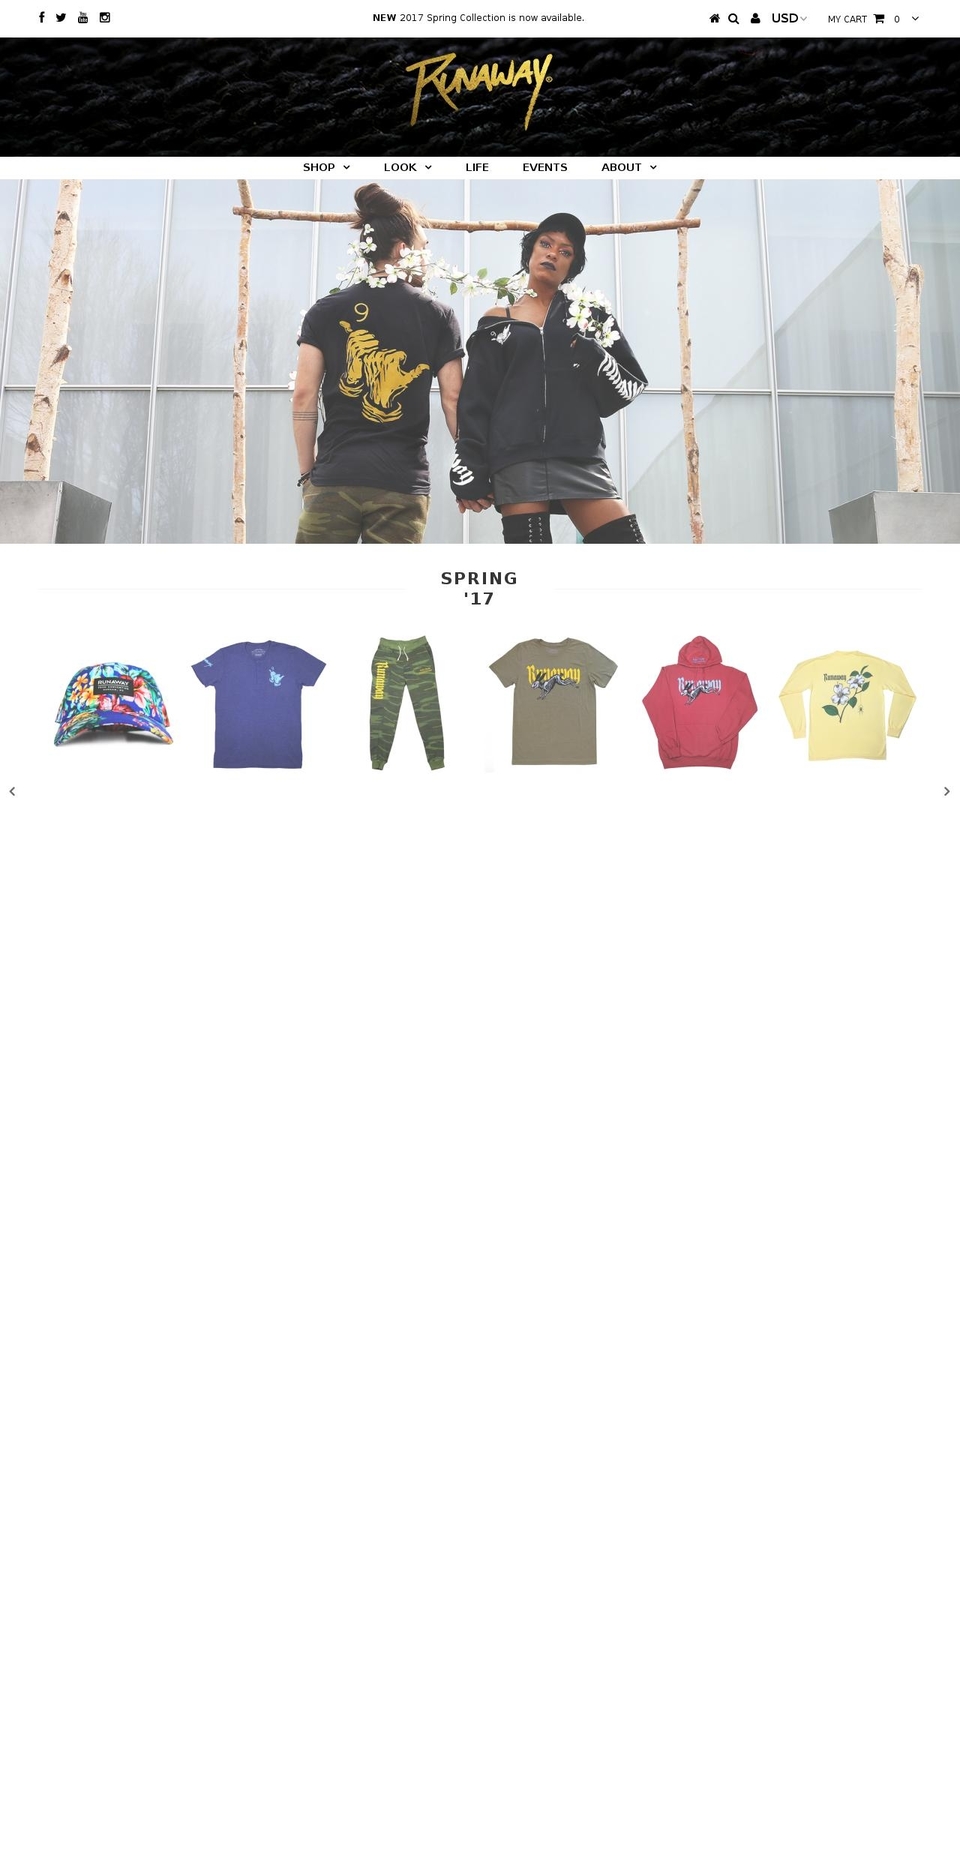 Testament Shopify theme site example runawayclothes.com